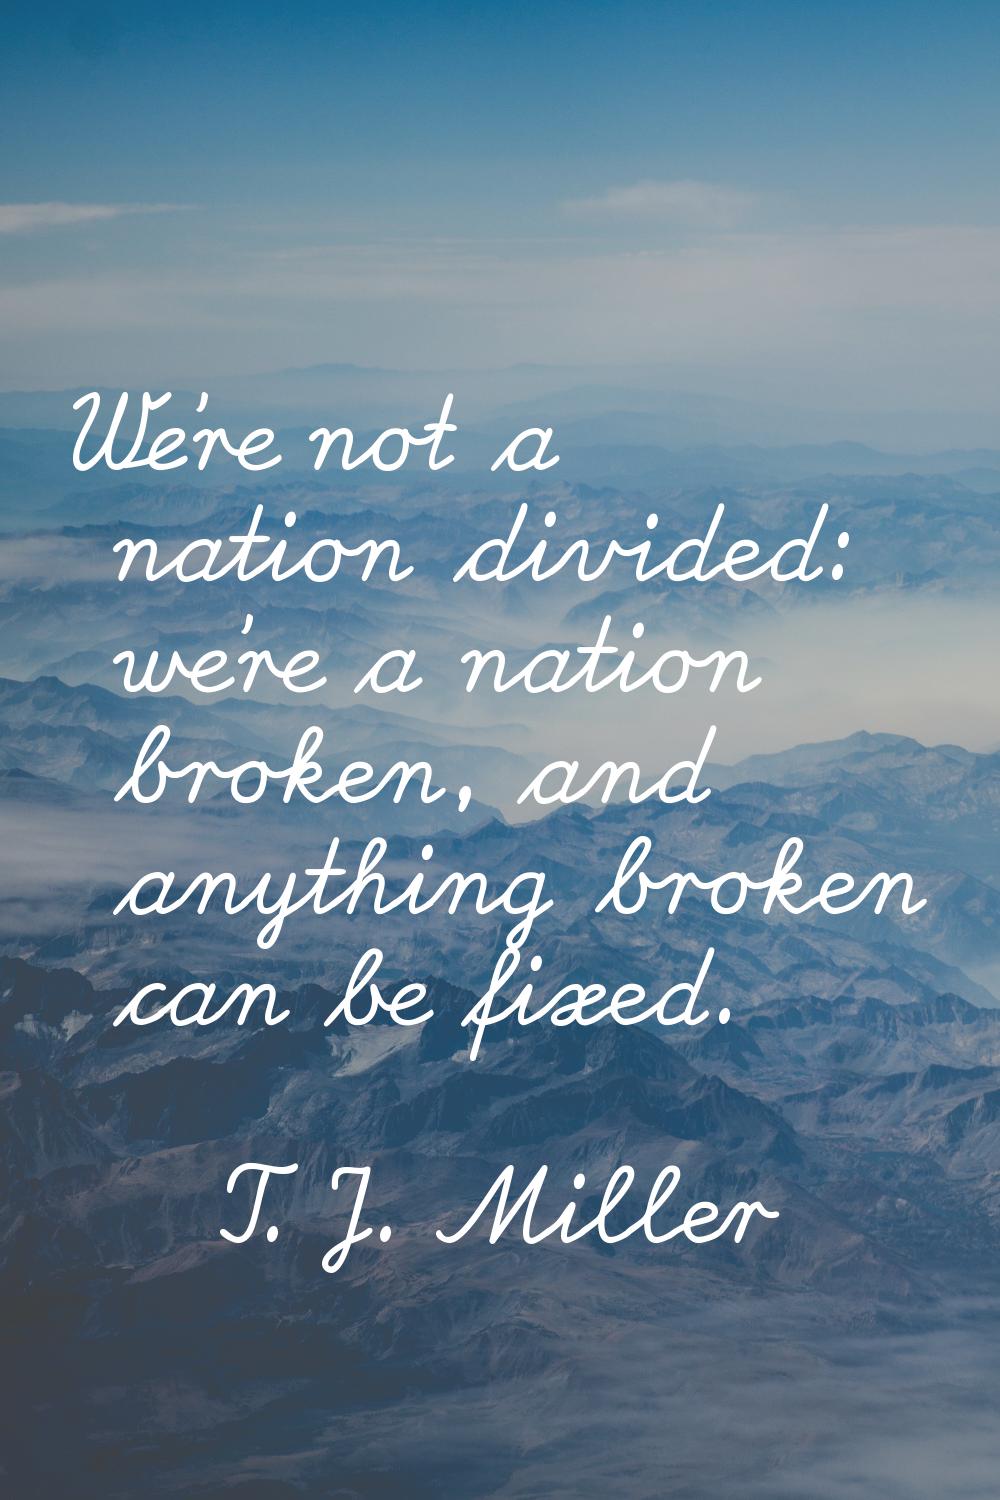 We're not a nation divided: we're a nation broken, and anything broken can be fixed.